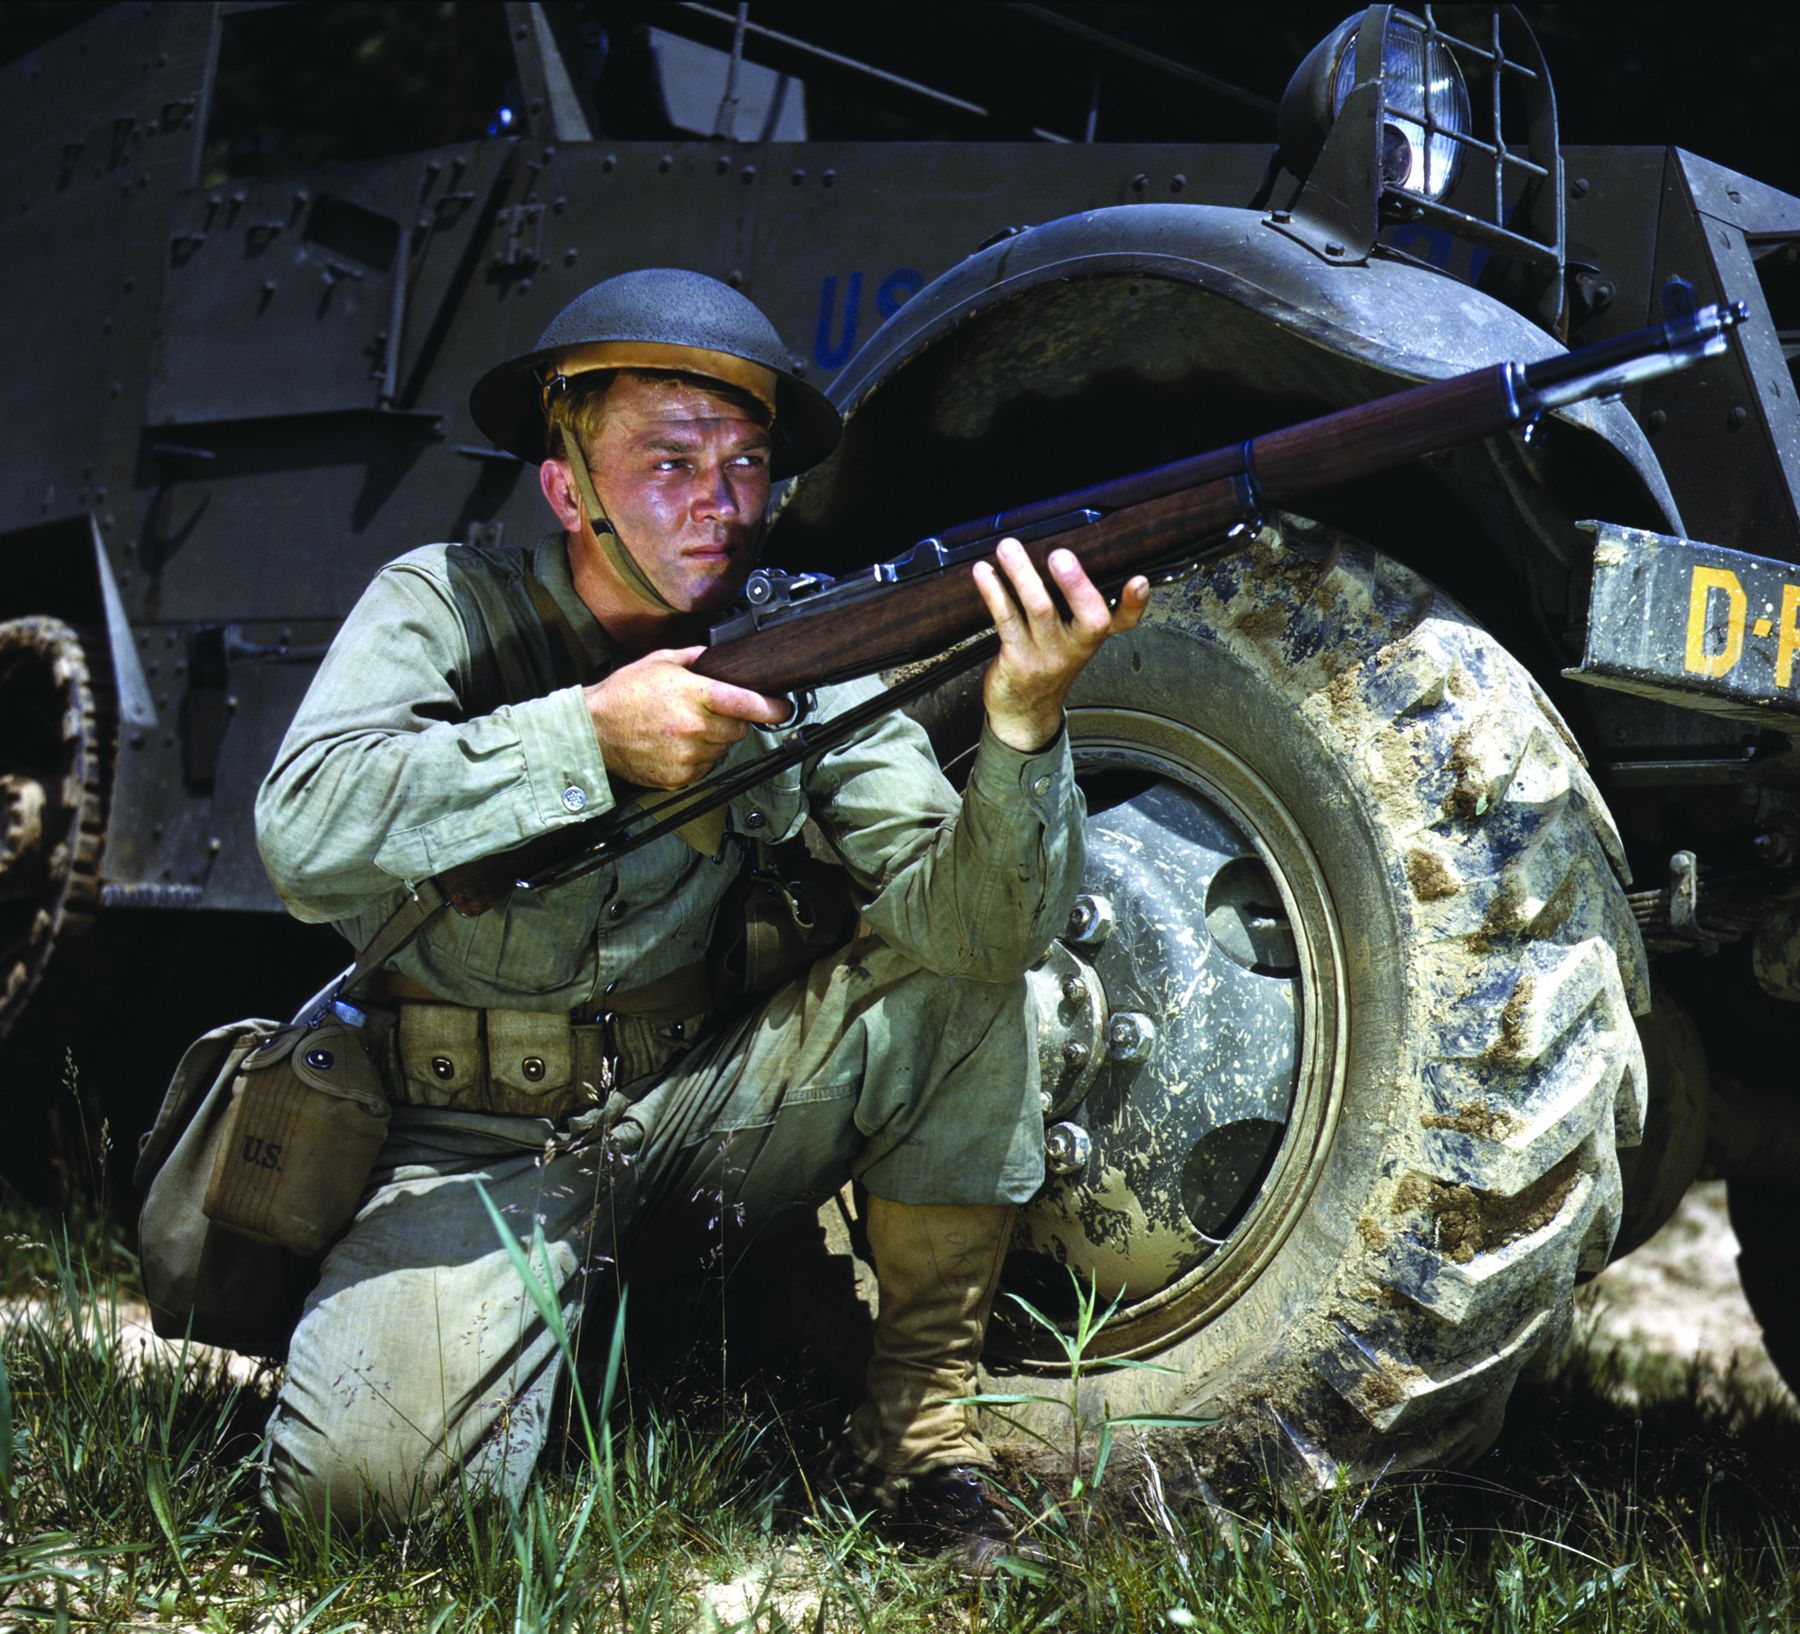 A U.S. soldier wears a  World War I-era Brodie helmet during exercises at Fort Knox, Kentucky, in June 1942.